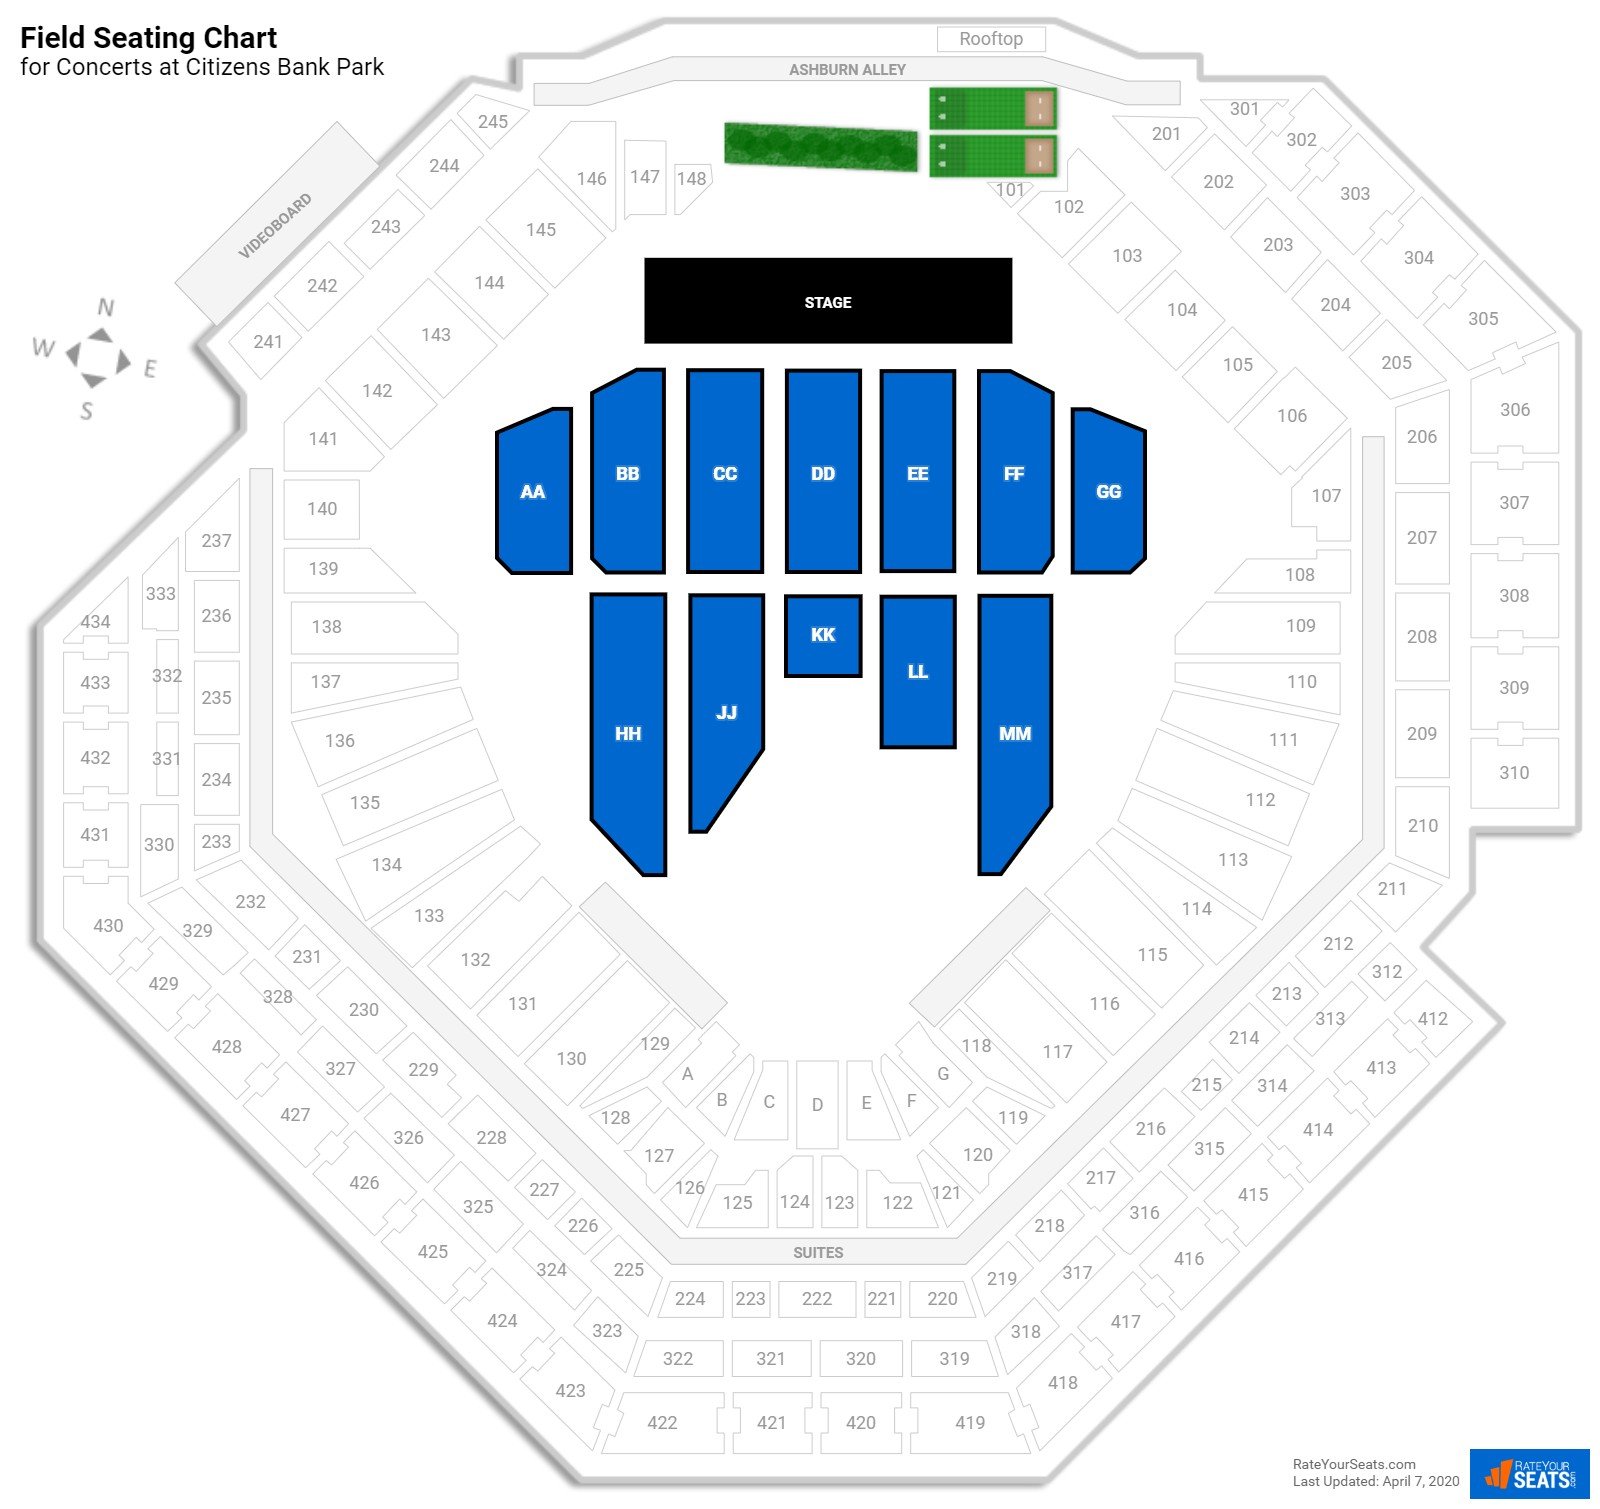 Citizens Bank Park Seating for Concerts - RateYourSeats.com